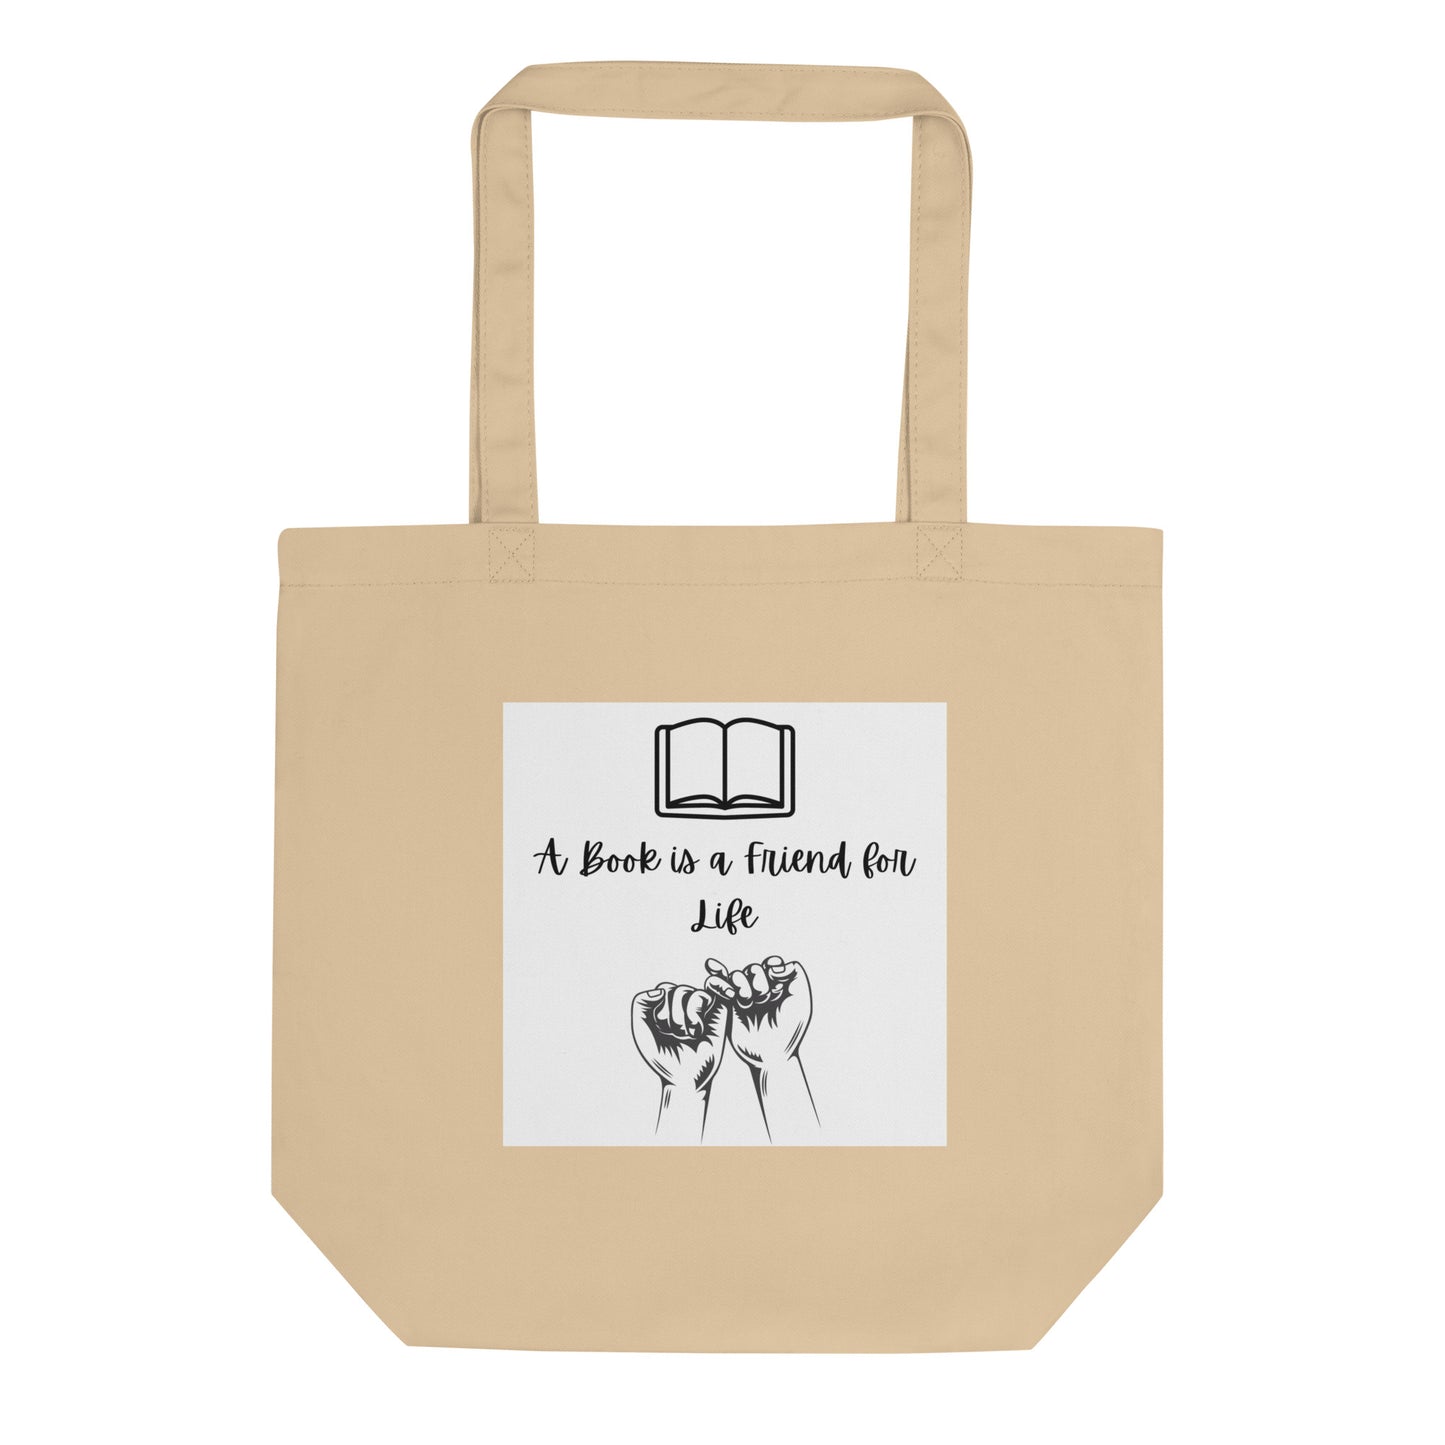 A Book is a Friend for Life Eco Tote Bag